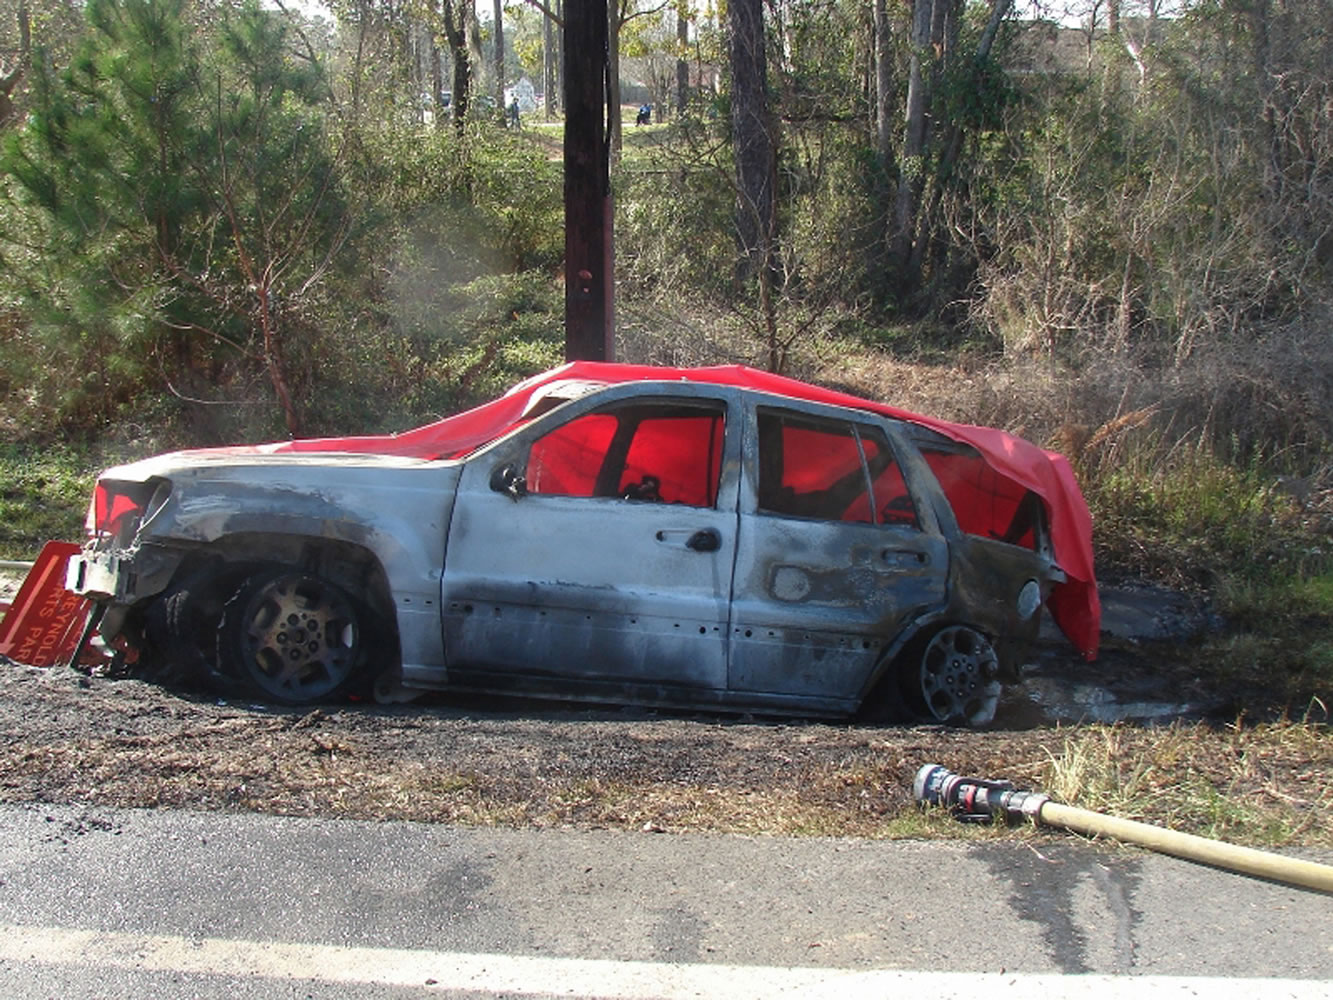 The scene of a 2012 crash in Bainbridge, Ga., where a 4-year-old boy named Remi Walden was burned and died when a Jeep Grand Cherokee was struck from the rear by a Dodge Dakota pickup truck.